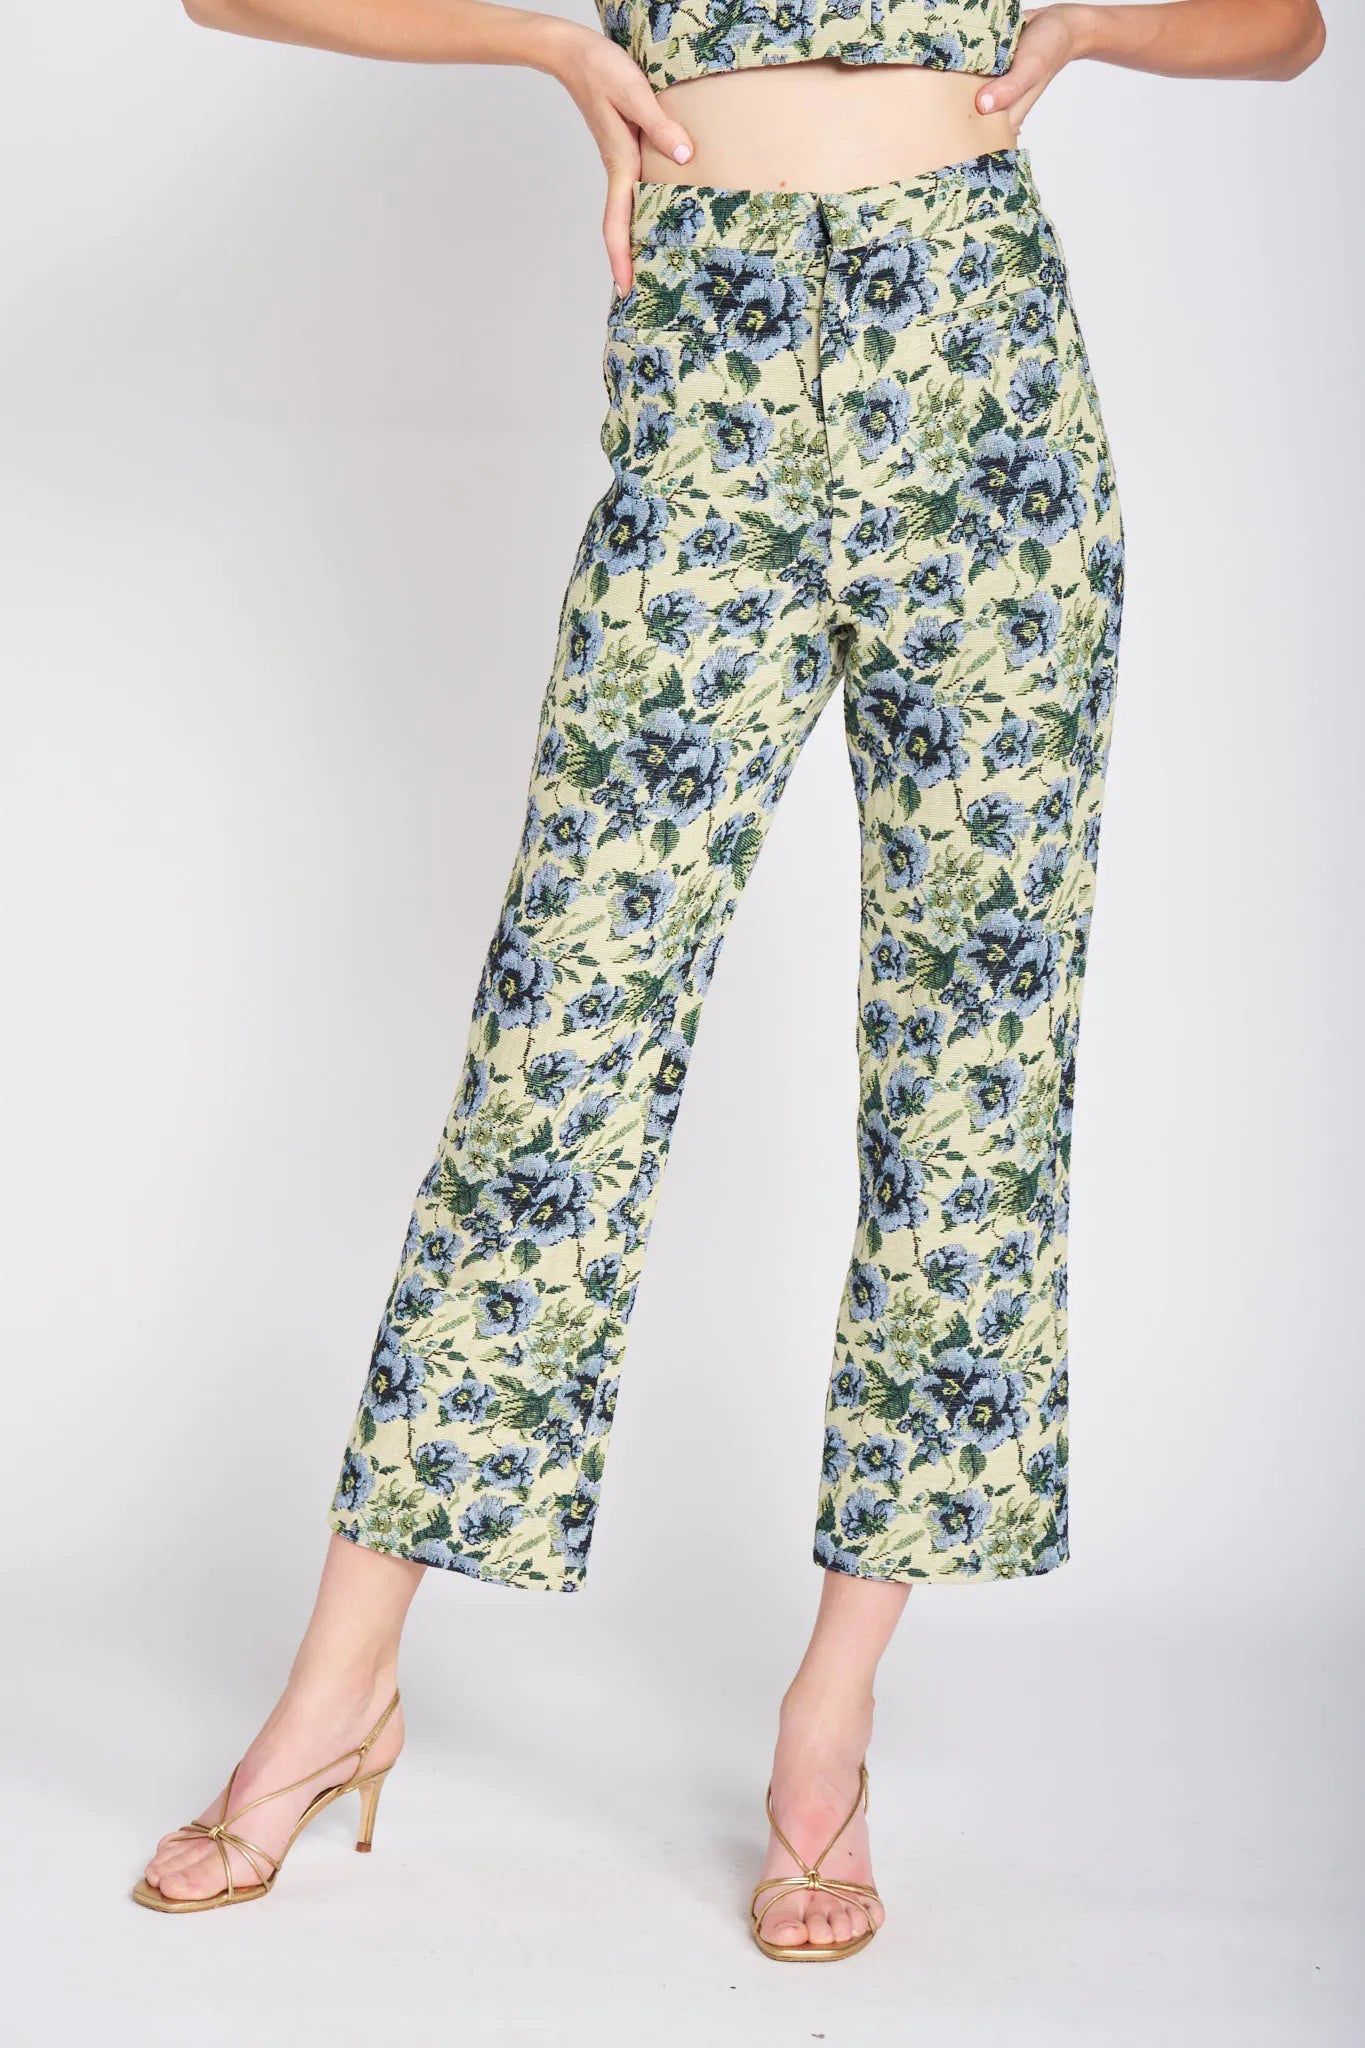 Black Floral High Waist Crop Trousers | New Look